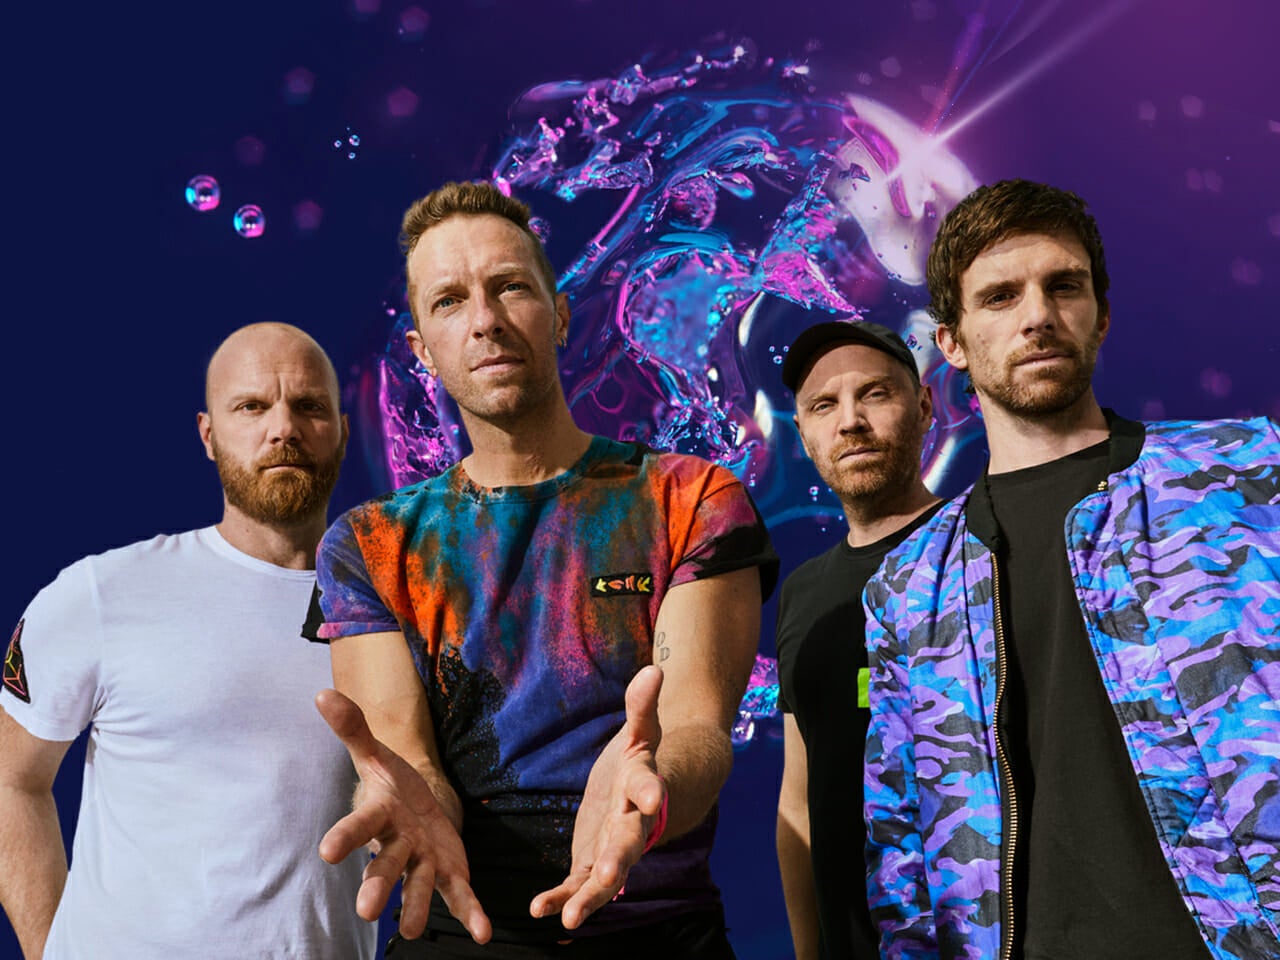 neste coldplay collaboration release photo. photo courtesy of coldplay 2